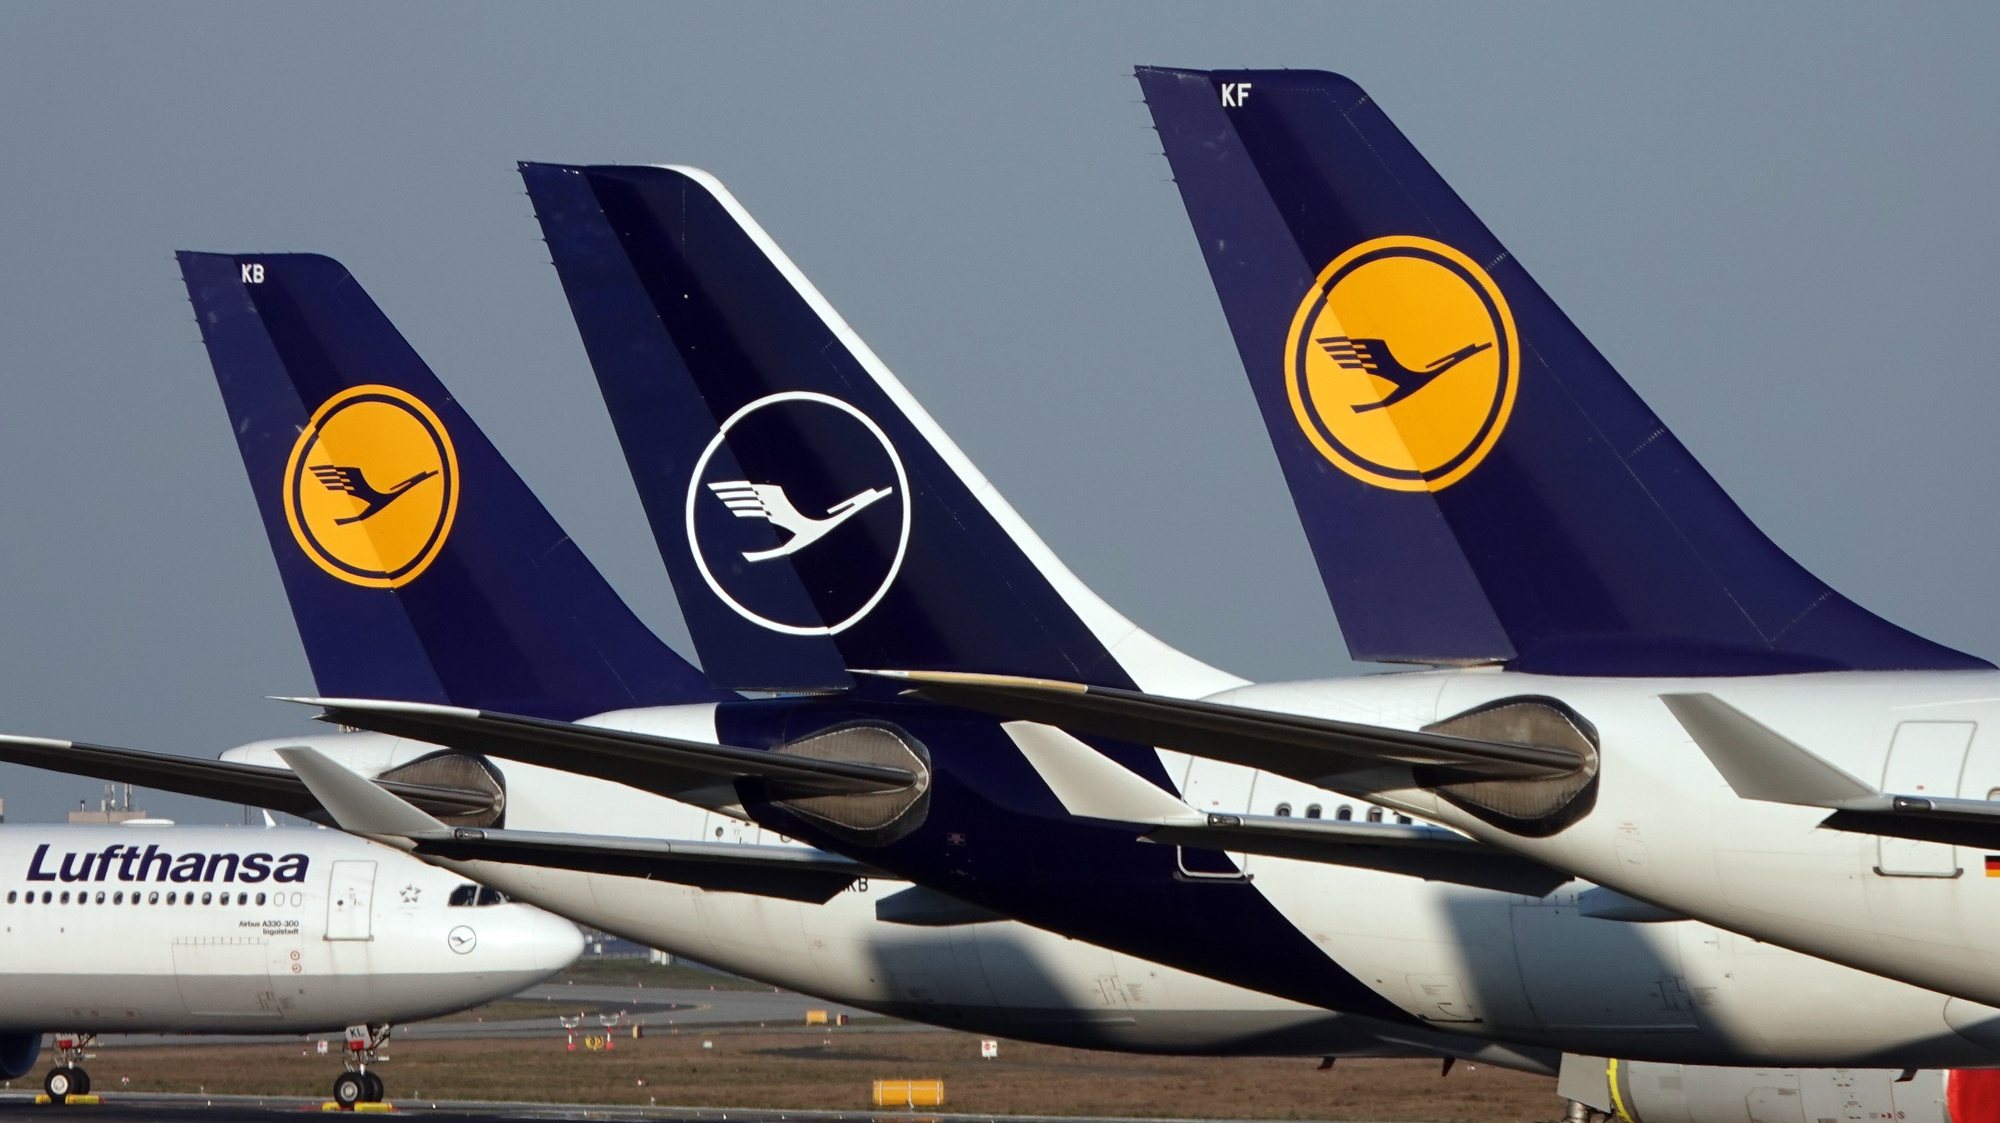 epa09050635 (FILE) Lufthansa passenger planes parked at Frankfurt airport&#039;s northern runway in Frankfurt, Germany, 25 March 2020 (reissued 04 March 2021). Lufthansa Group in a statement on 04 March 2021 reported a 5.5 billion euro operating loss in 2020, mostly due to the ongoing coronavirus Covid-19 pandemic.  EPA/MAURITZ ANTIN *** Local Caption *** 56475375